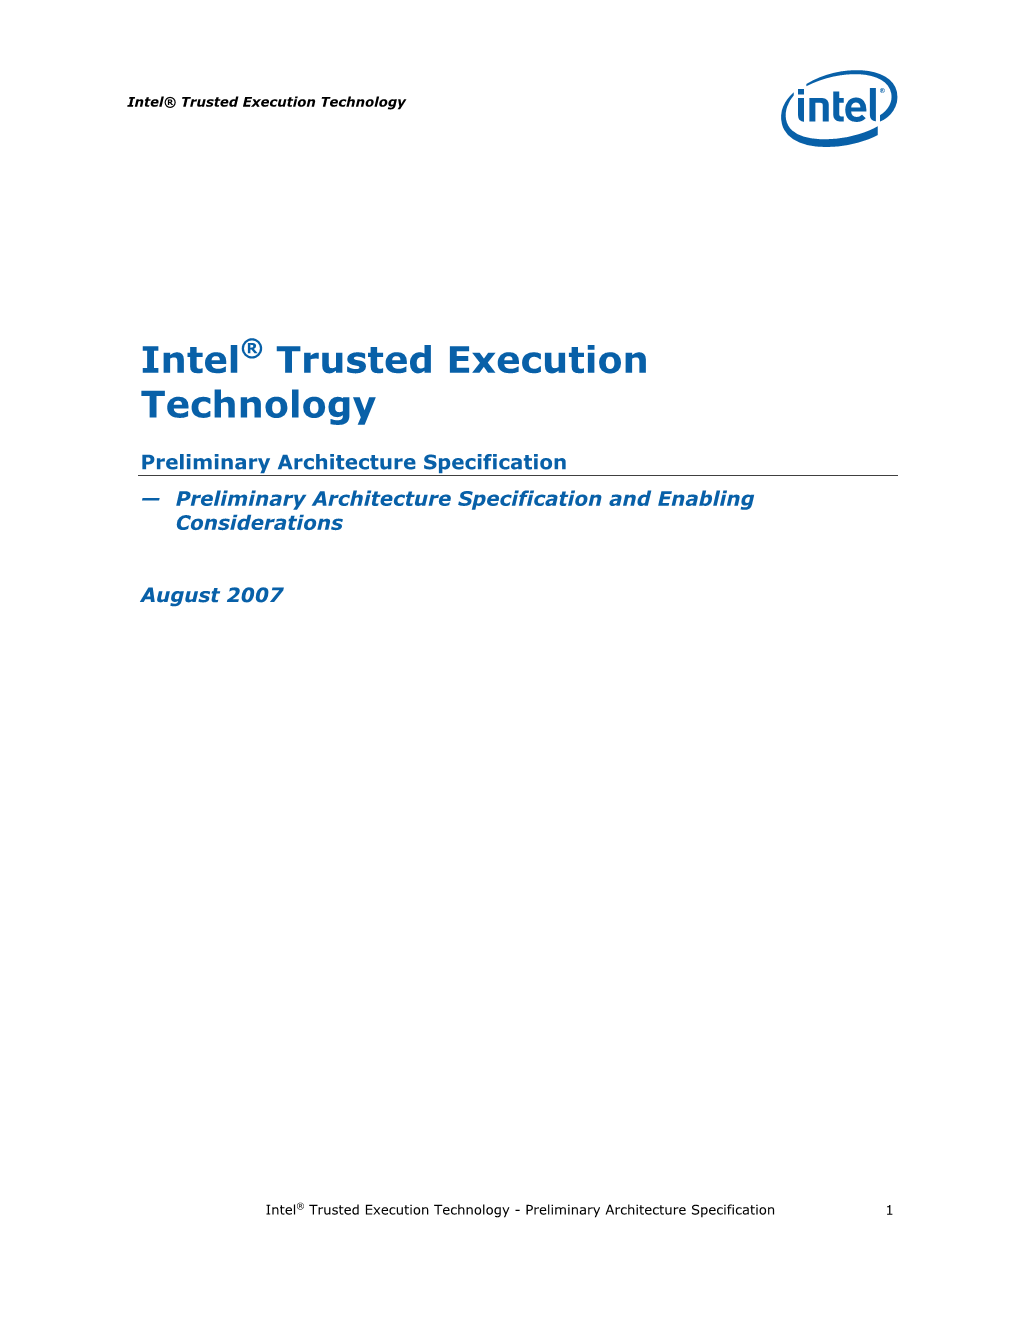 Intel® Trusted Execution Technology Preliminary Architecture Specification